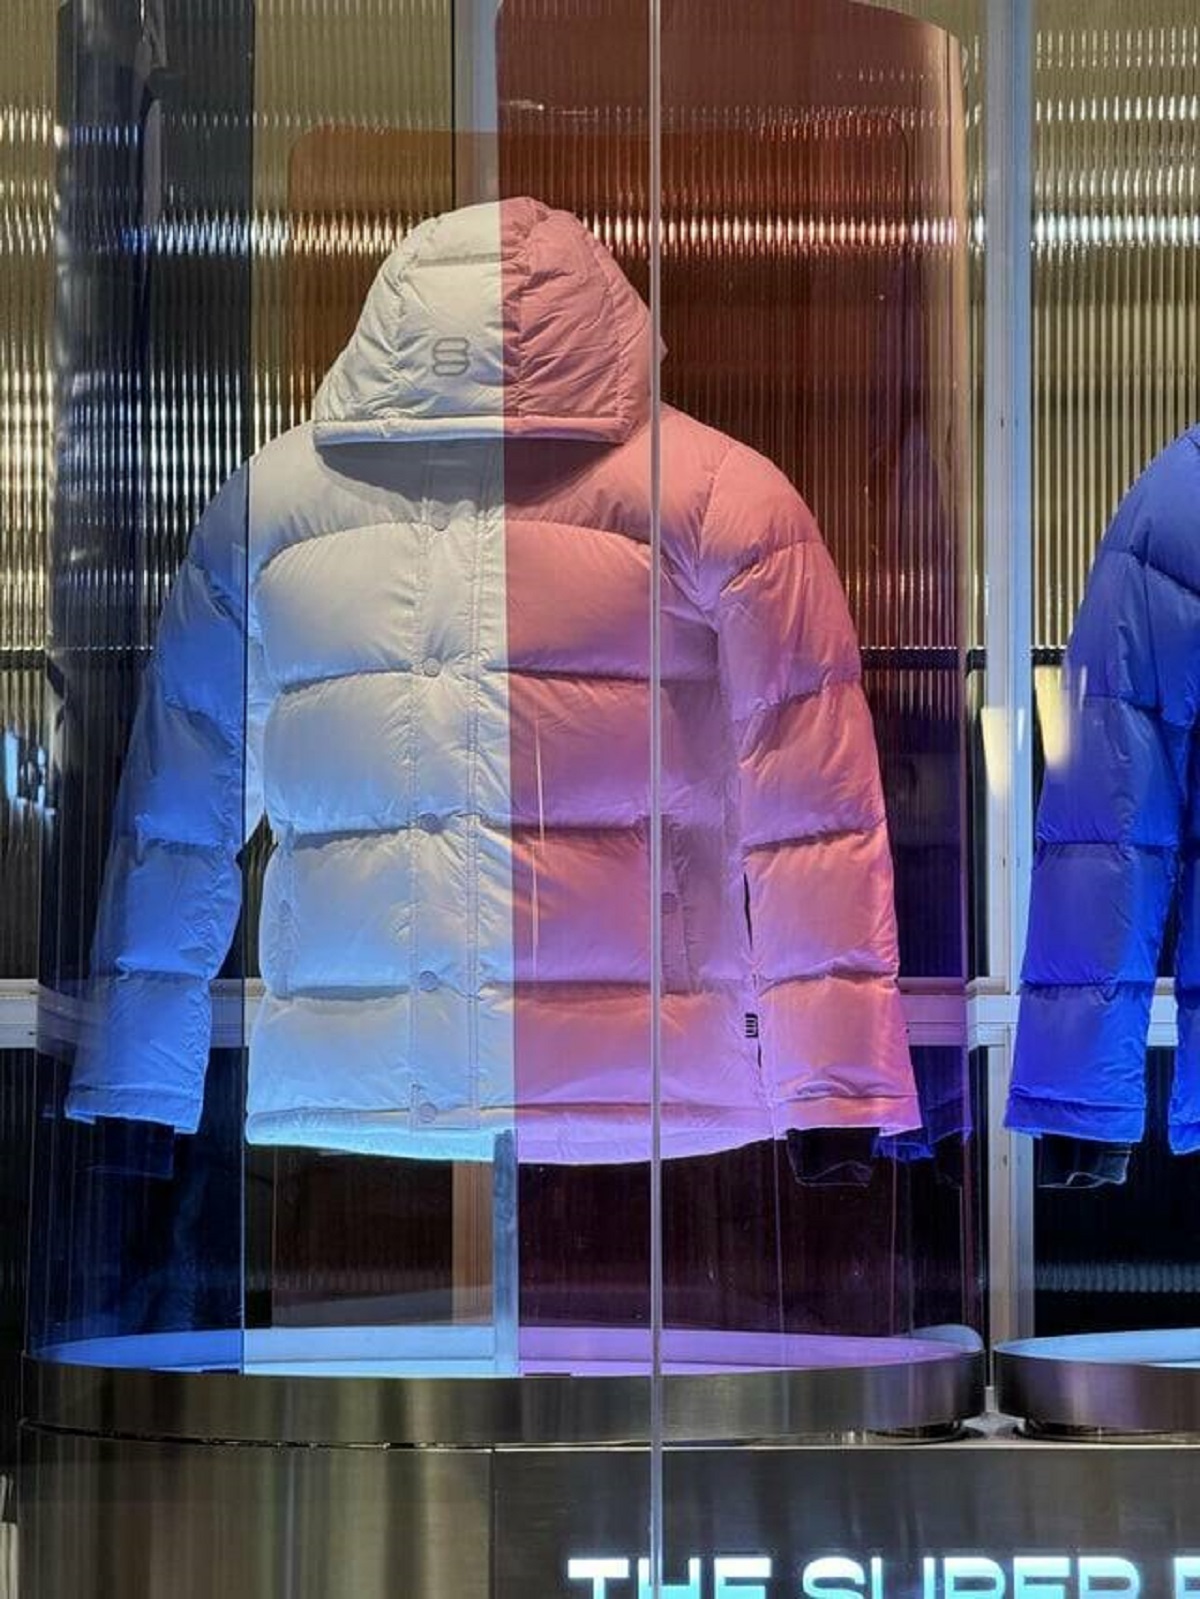 "This storefront uses tinted sheets of plastic to show you what the jacket would look like in different colors"